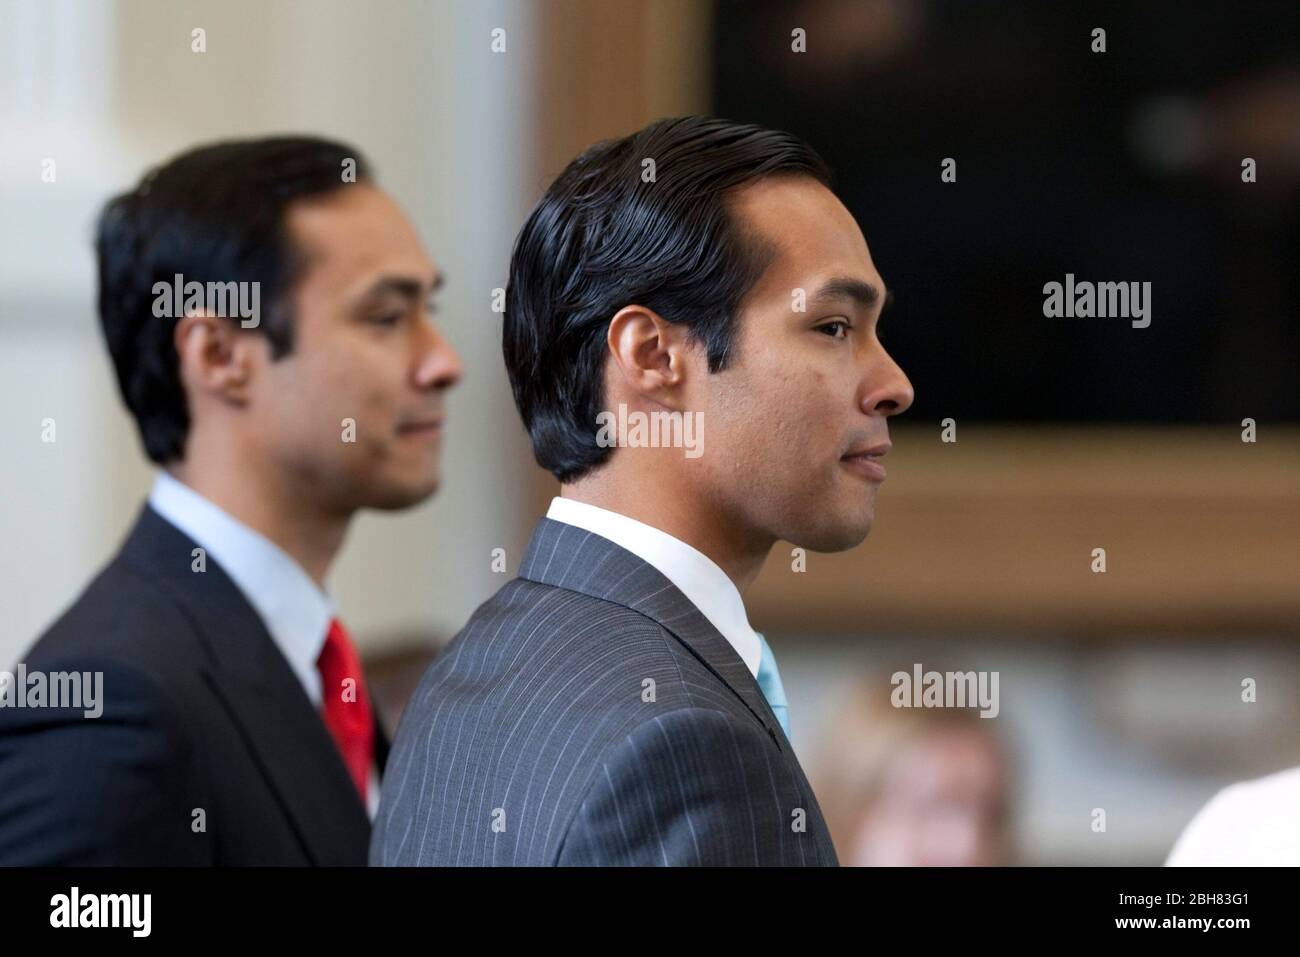 Austin Texas USA, May 27, 2009: Newly-elected mayor of San Antonio, Julian Castro, visits with legislators at the Texas Capitol following his spring election victory. Castro's identical twin brother, Joaquin (left), is a state representative. ©Bob Daemmrich Stock Photo